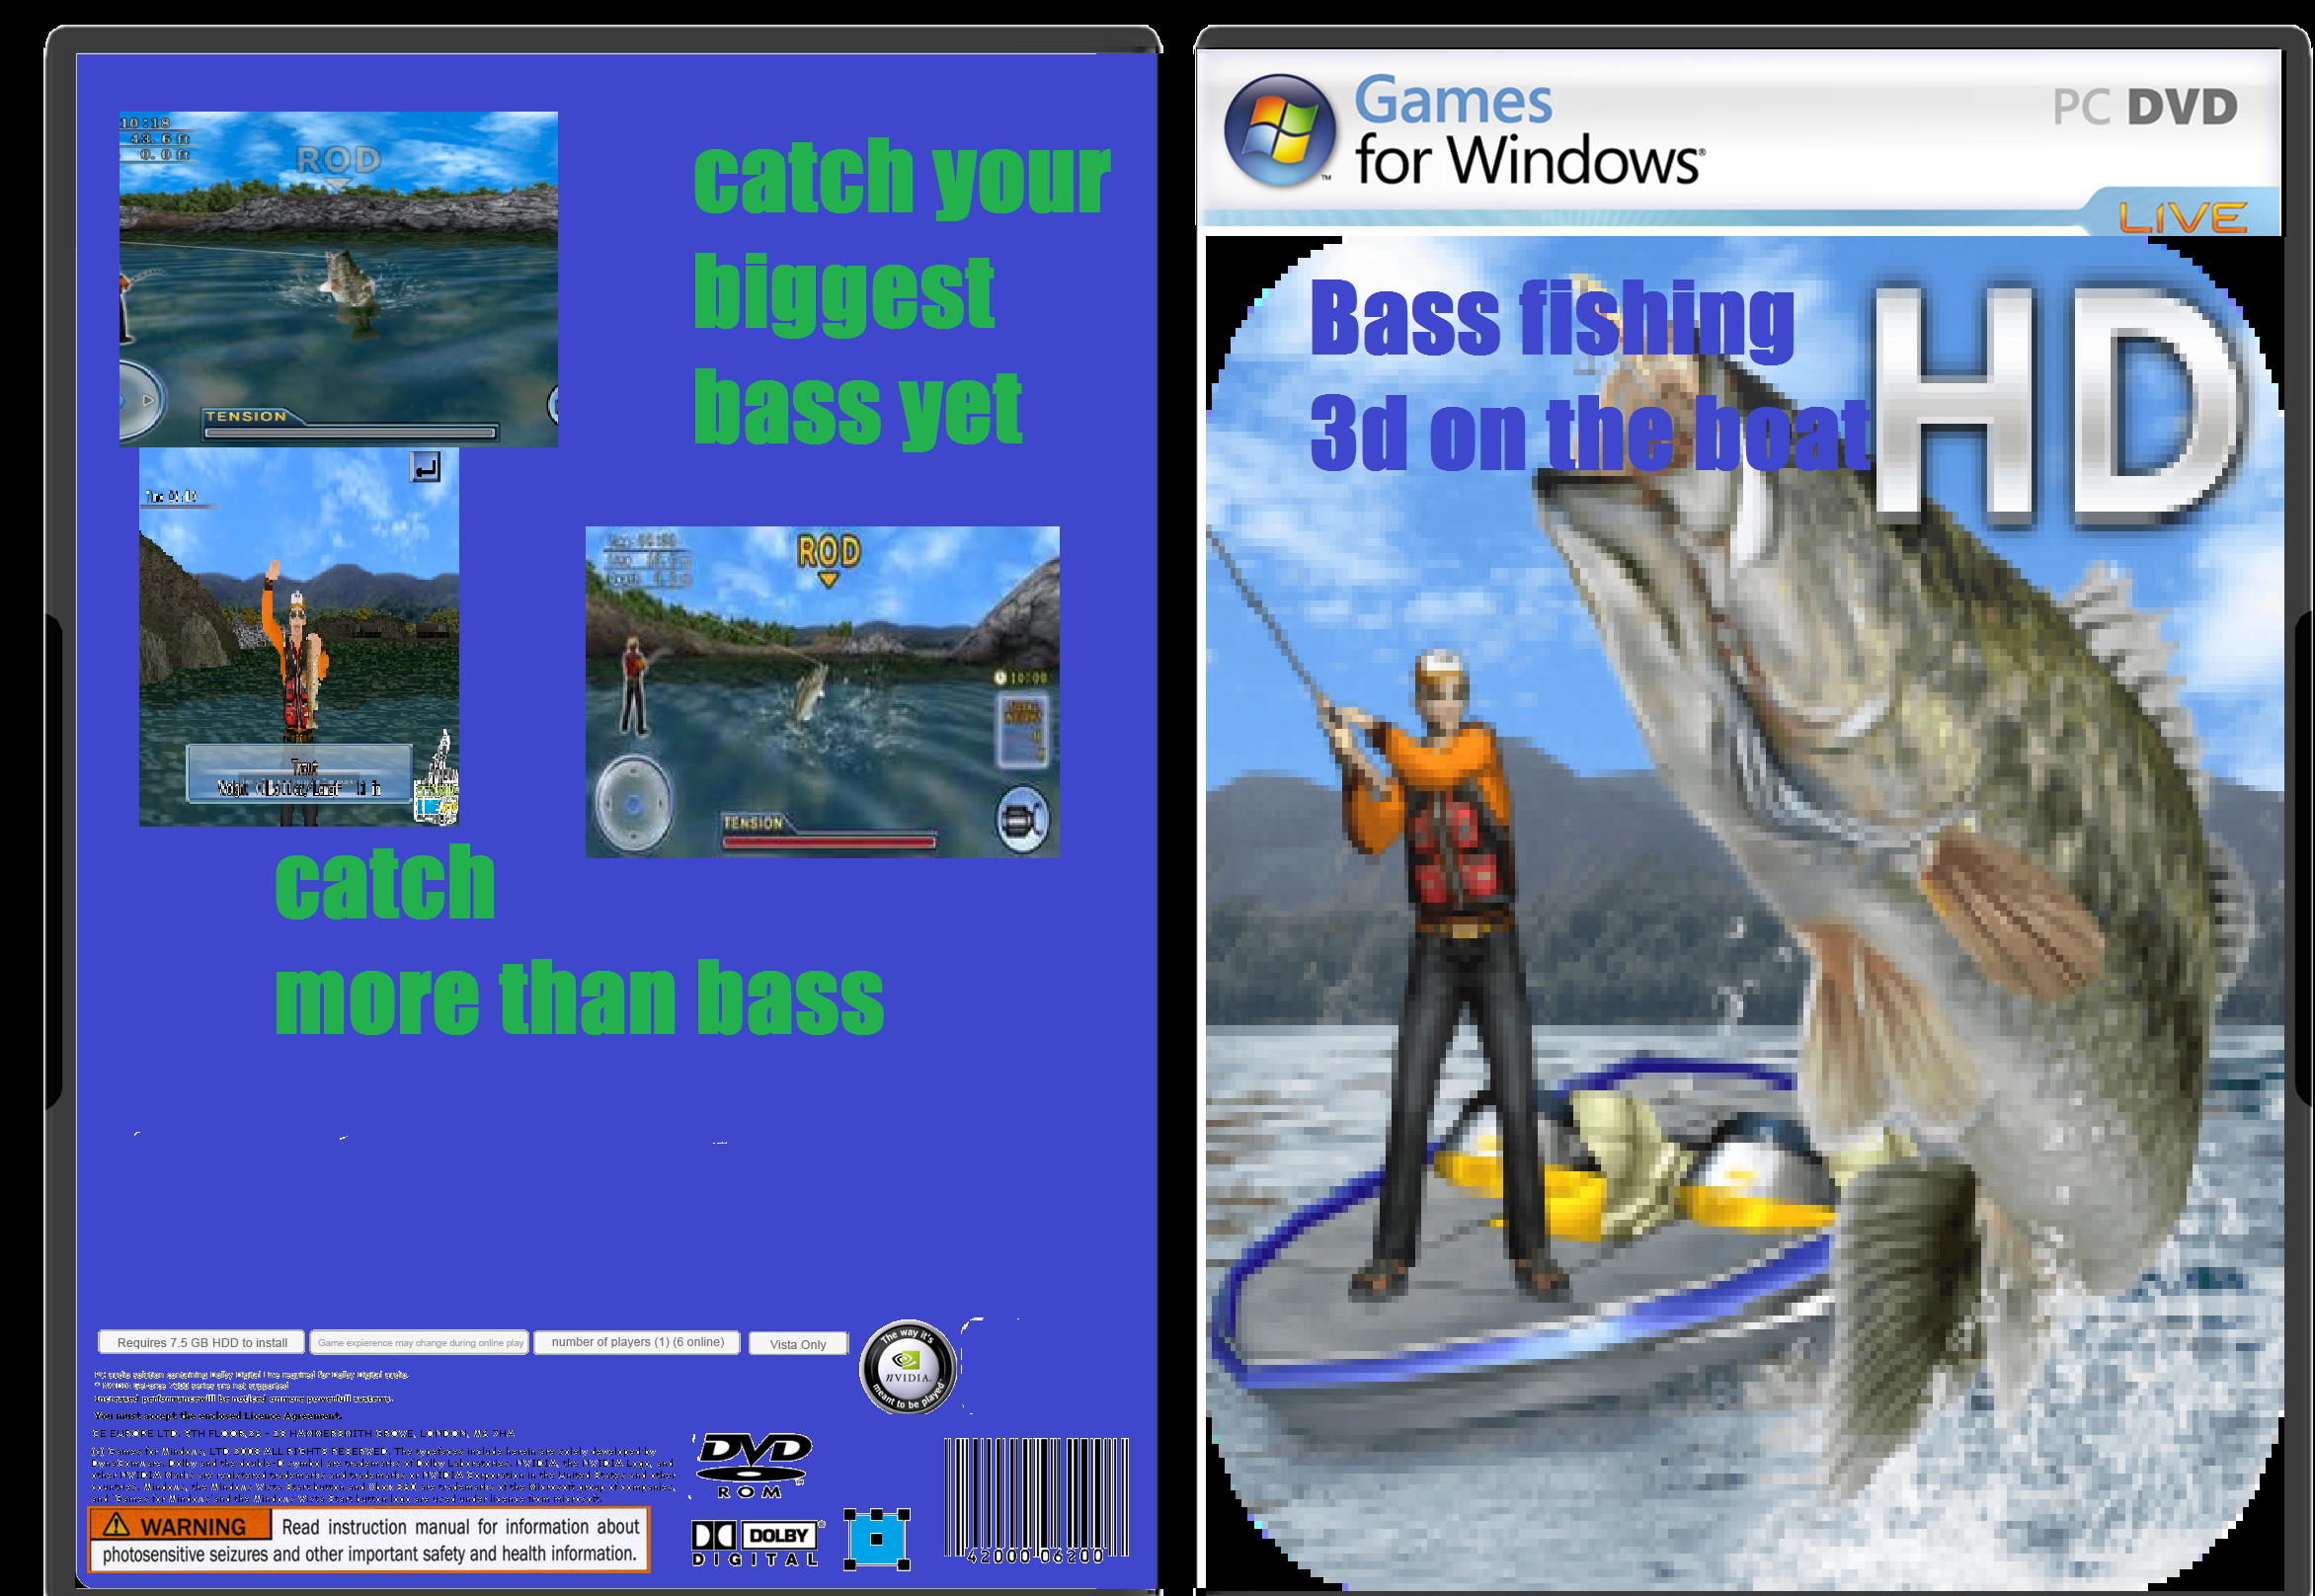 Bass fishing 3d: on the boat HD box cover